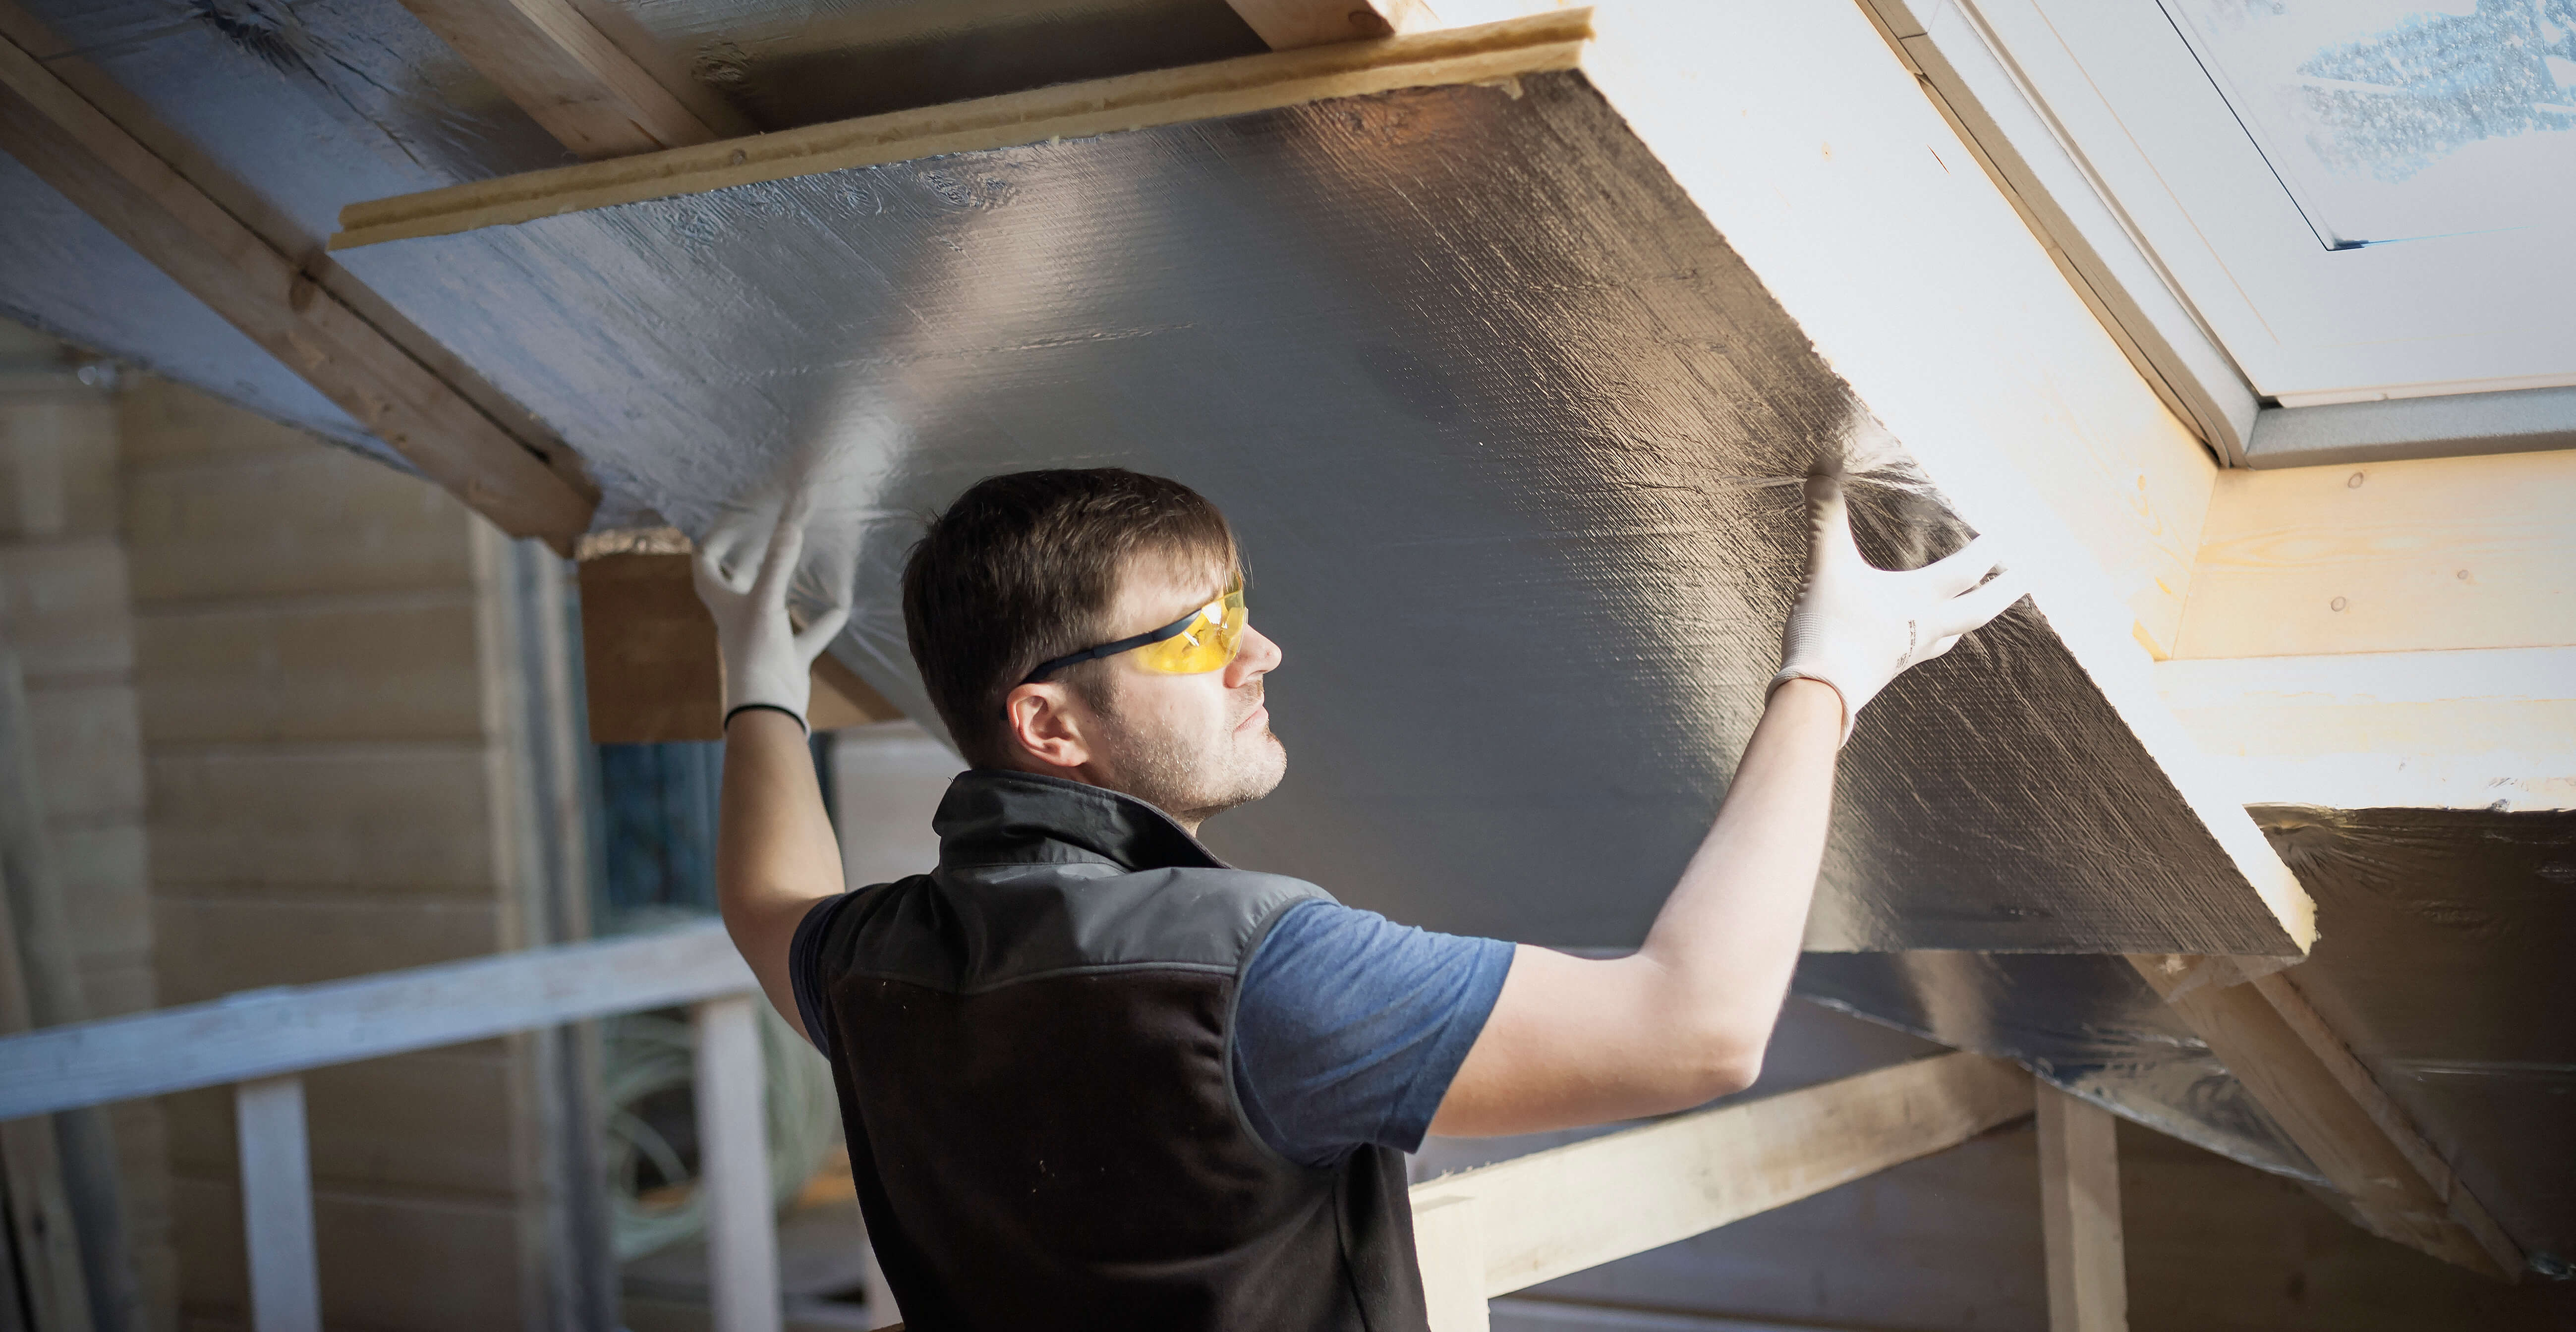 Handyman with protection glasses and white gloves on, insulating a house